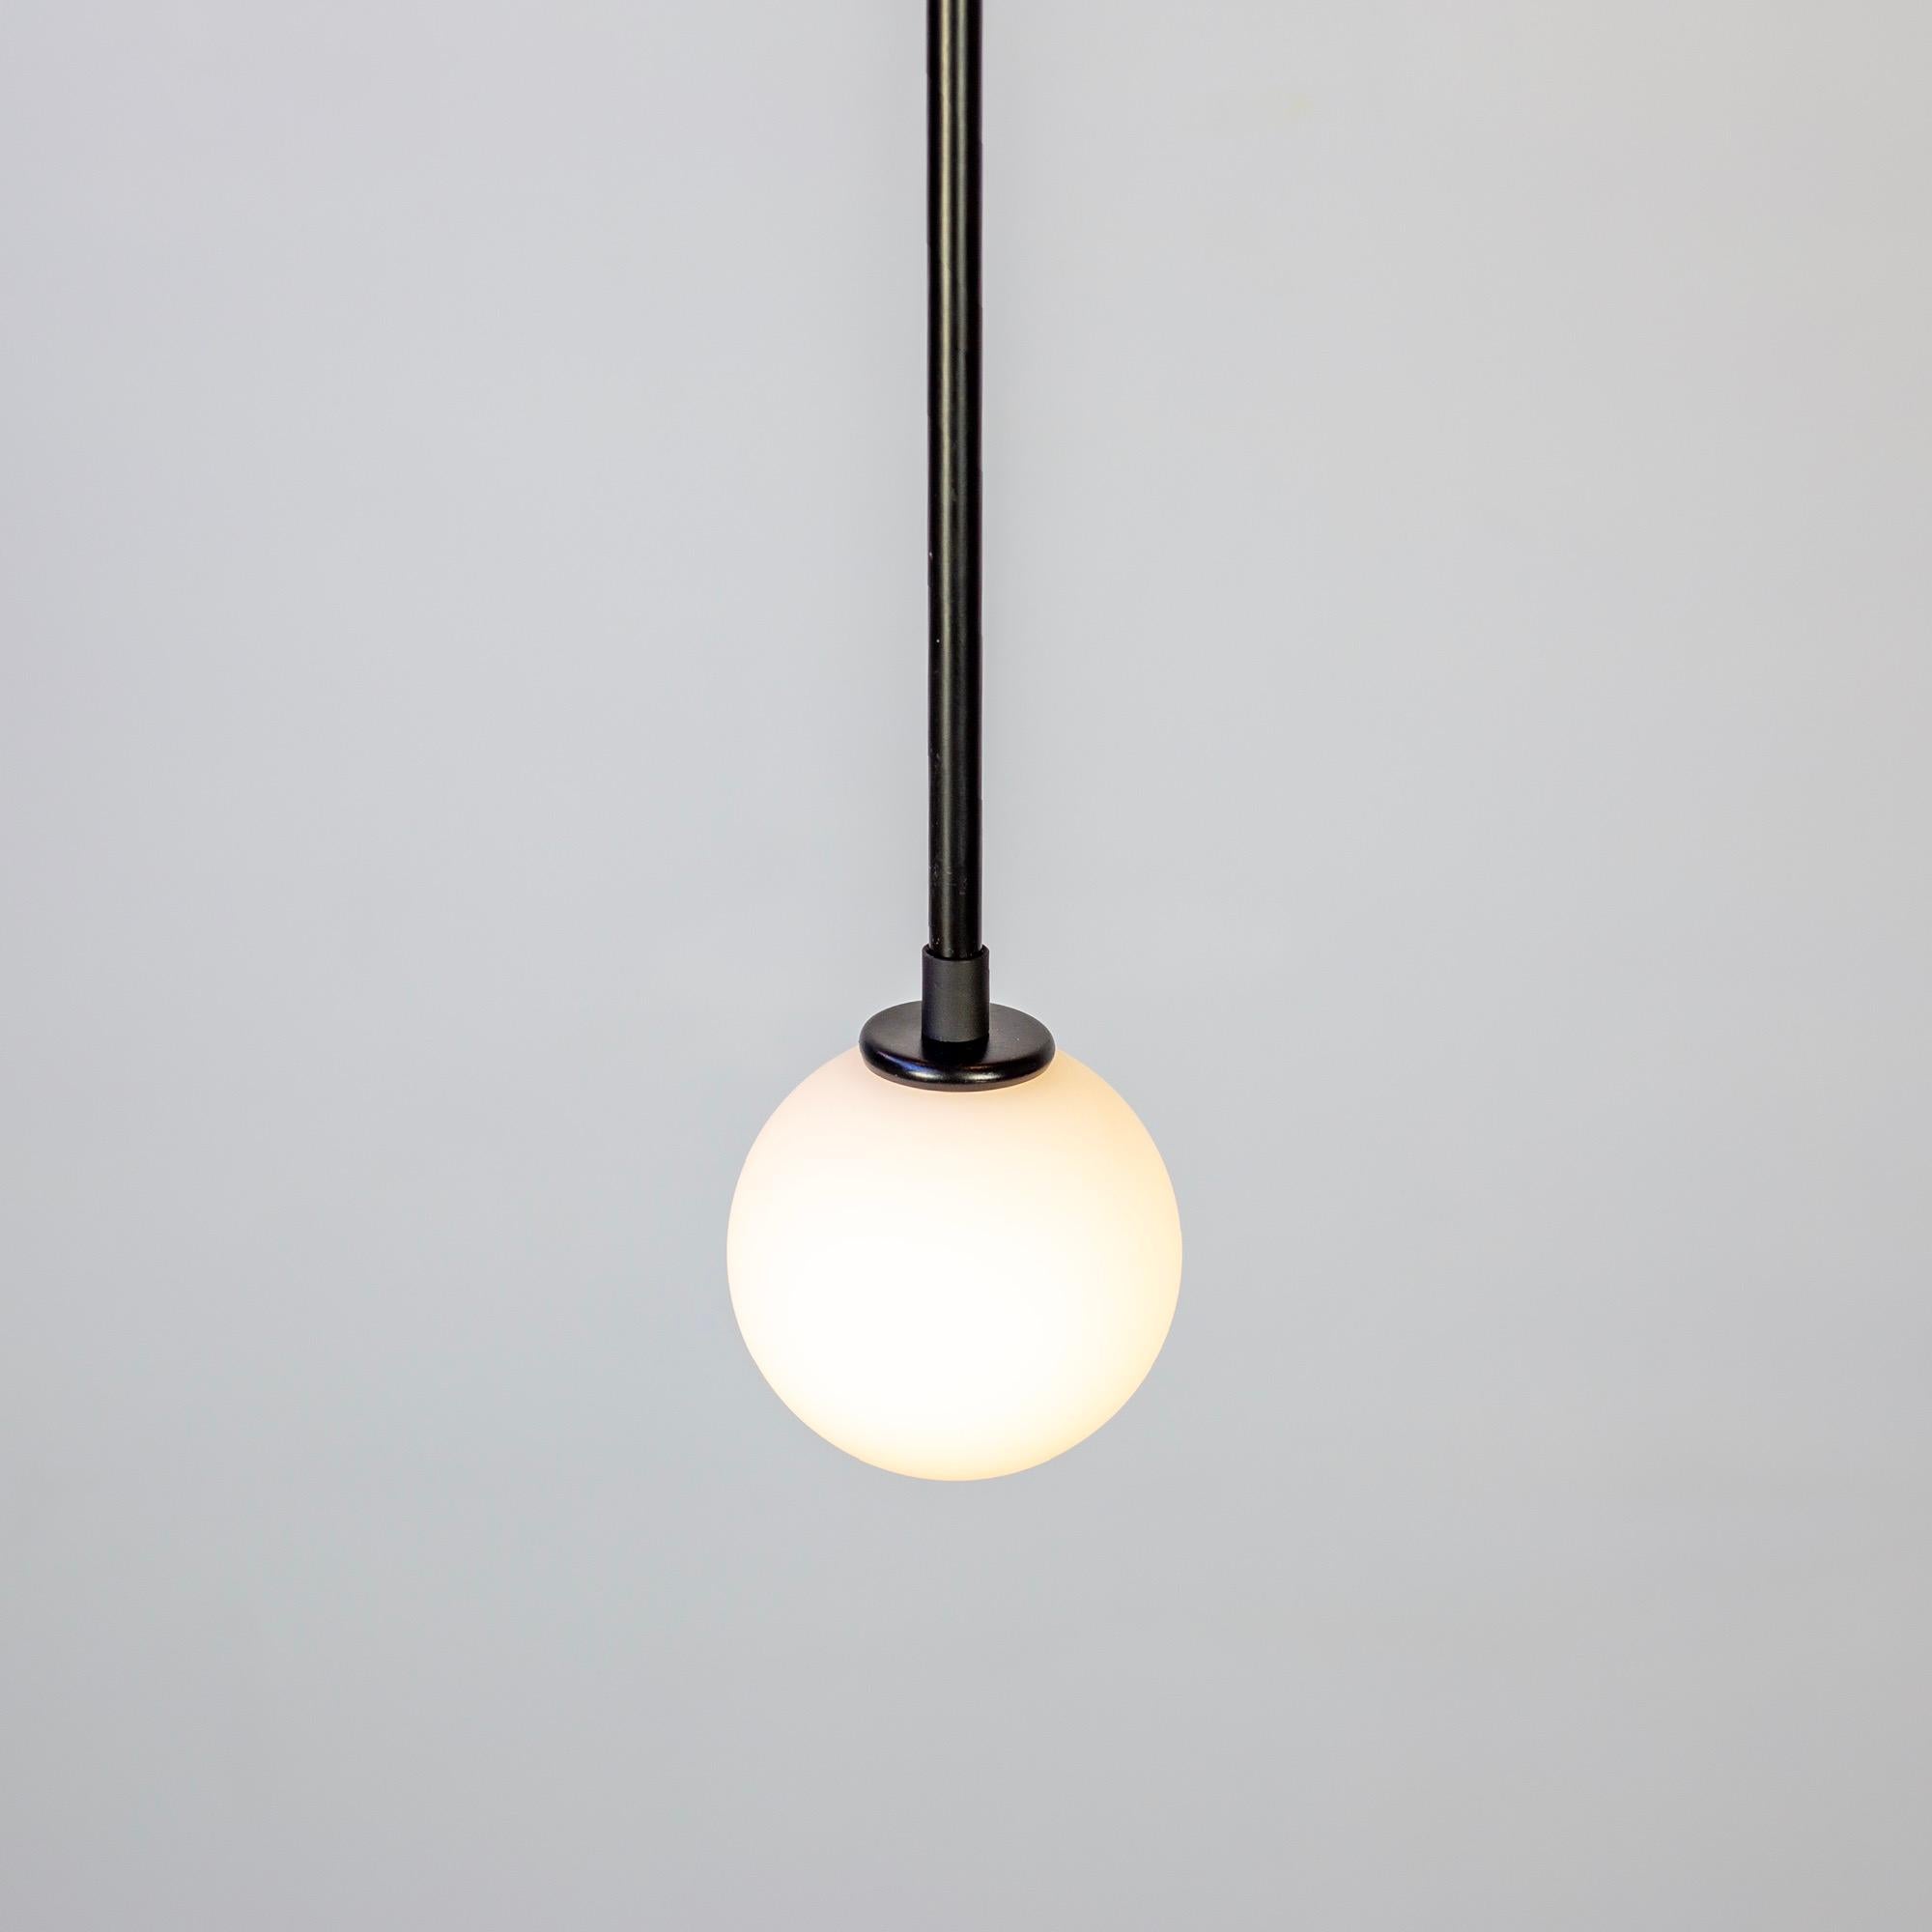 American Ball Pendant by Research.Lighting, Black, Made to Order For Sale